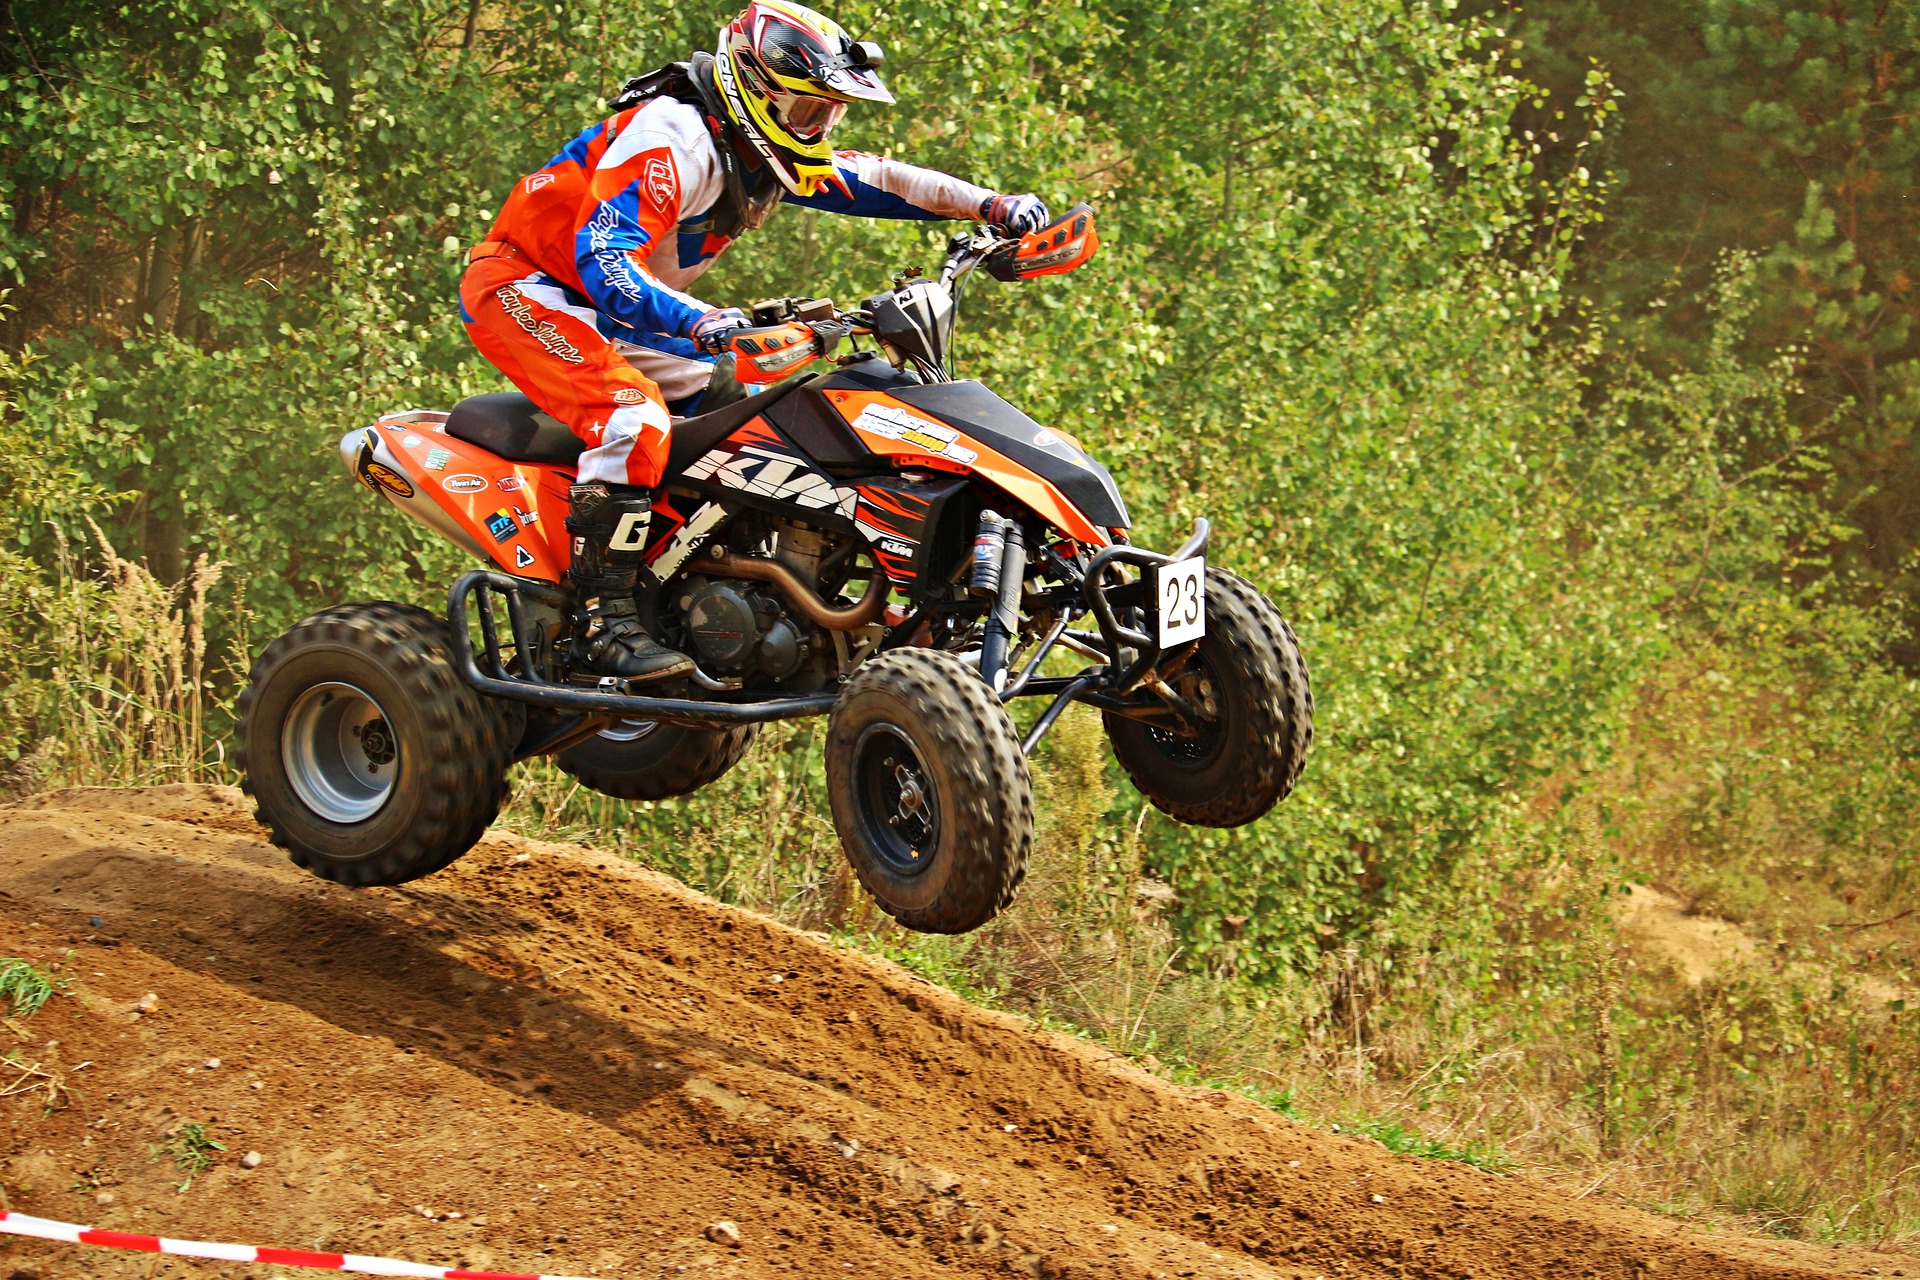 ATV riding safety and injury prevention